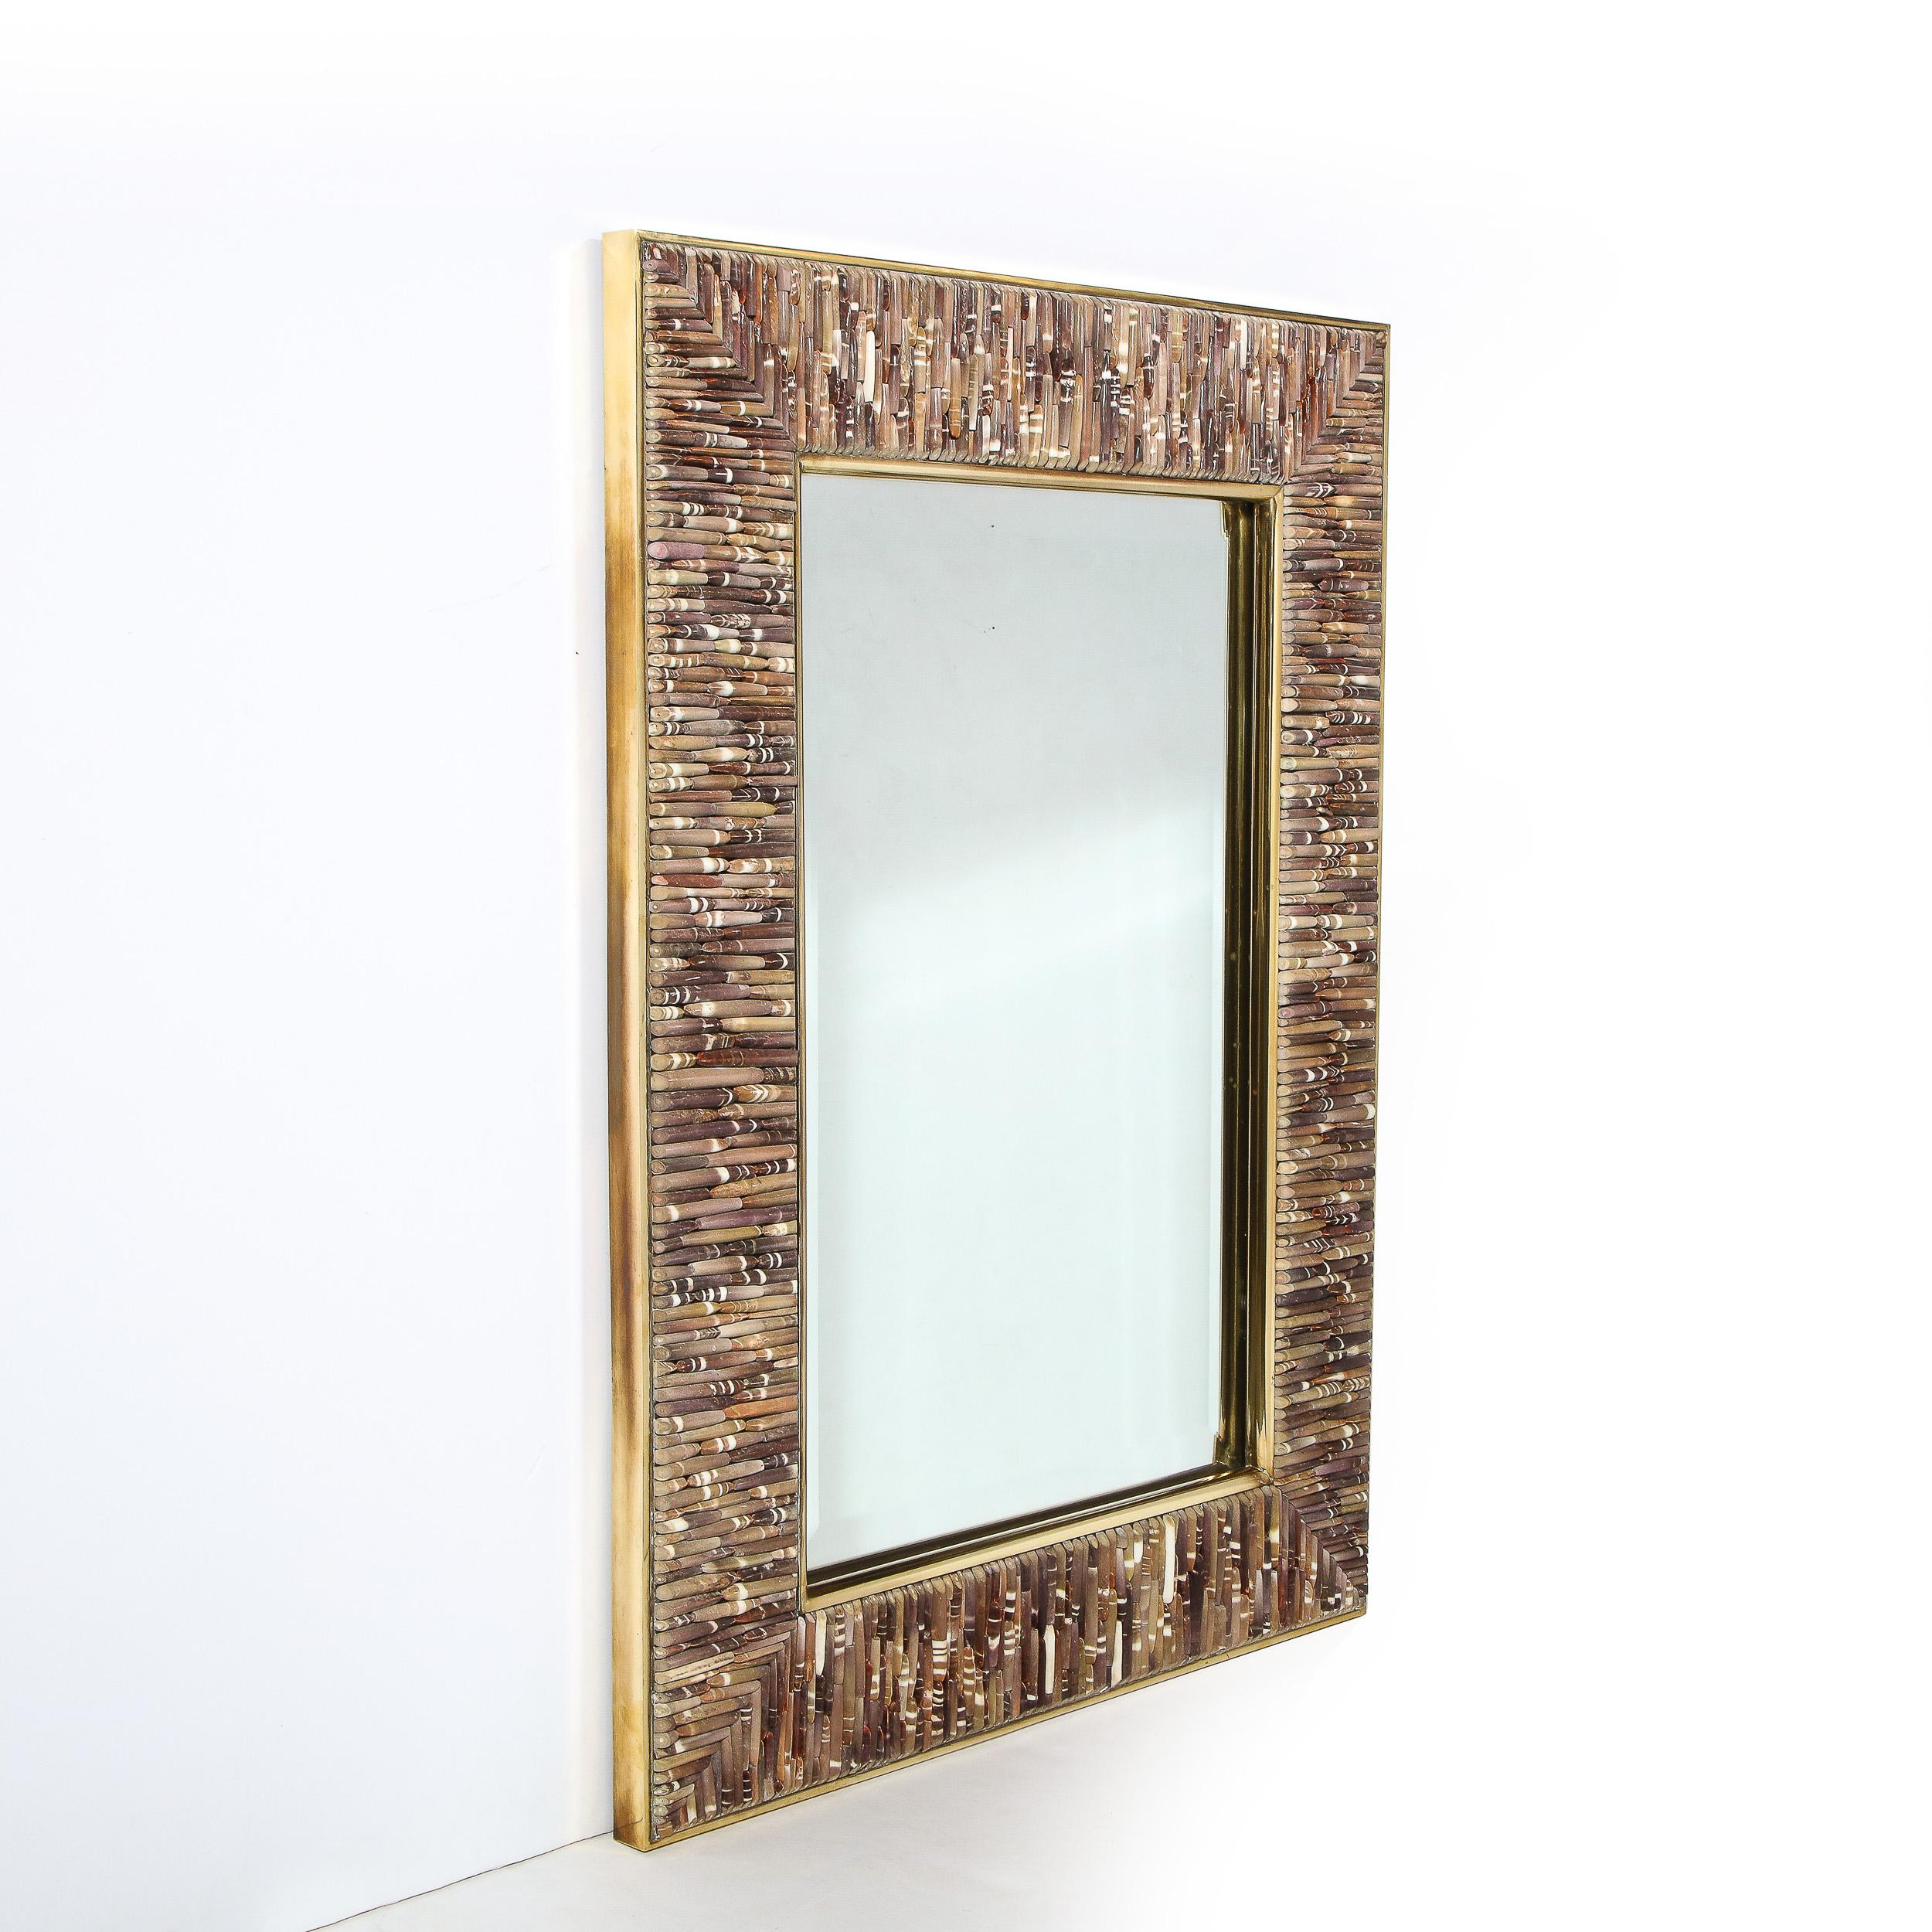 This Mirror in the style of Joseph Varsas is a potent example of nature’s constant and inseparable influence on designers and the art they produce. Designed and fabricated in the United States Circa 1980, this piece is framed in stunning Sea Urchin